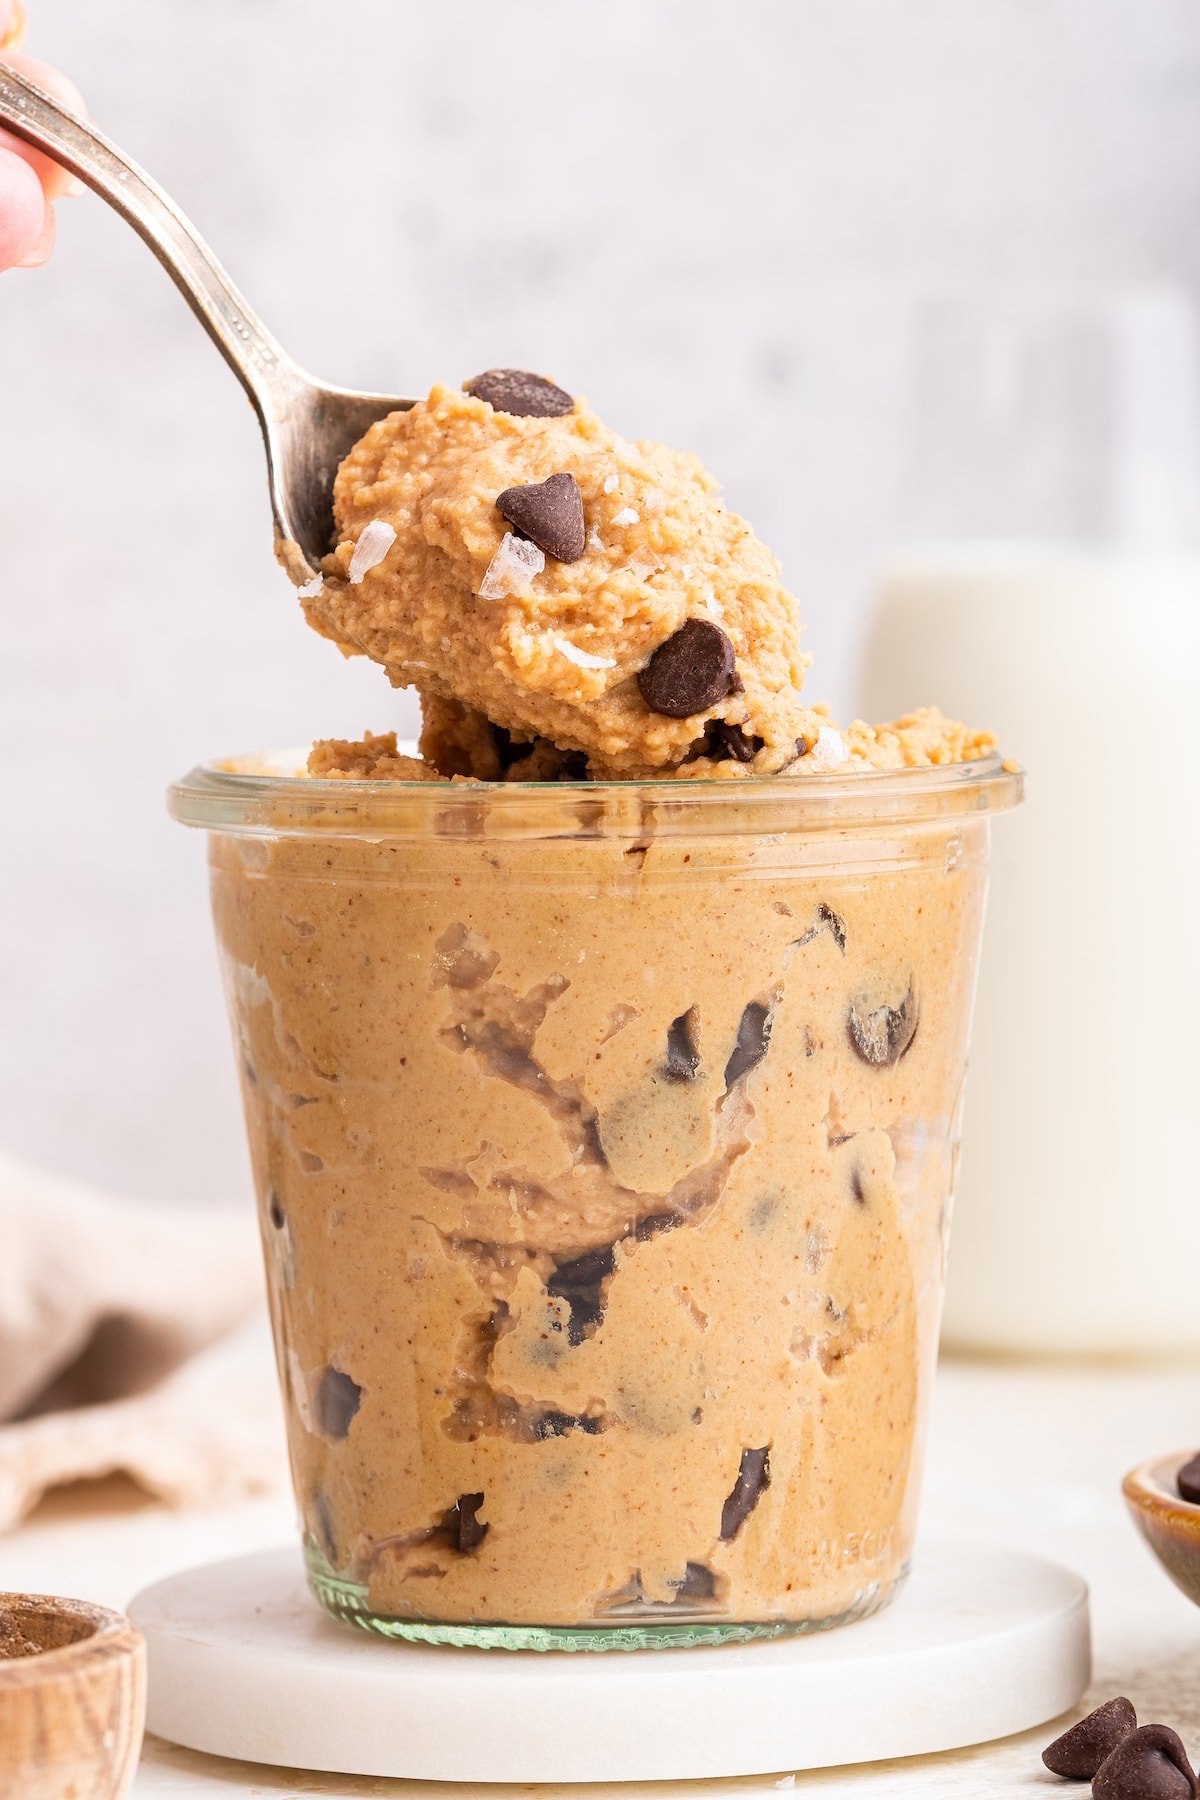 Protein cookie dough in a glass cup with a spoon.